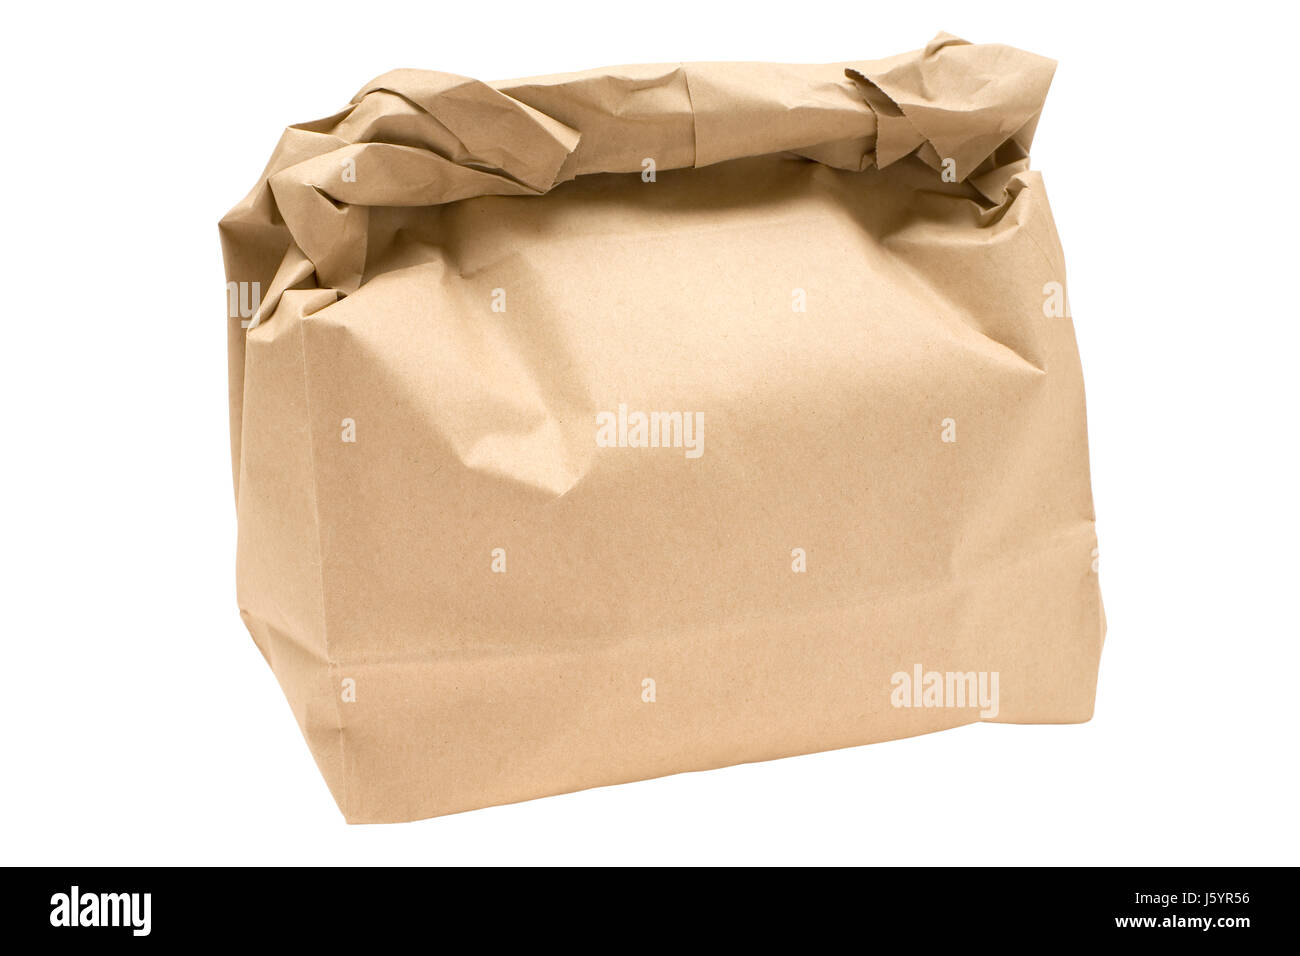 brown brownish brunette bag purchase paper bag shopping bag sandwich carrying Stock Photo